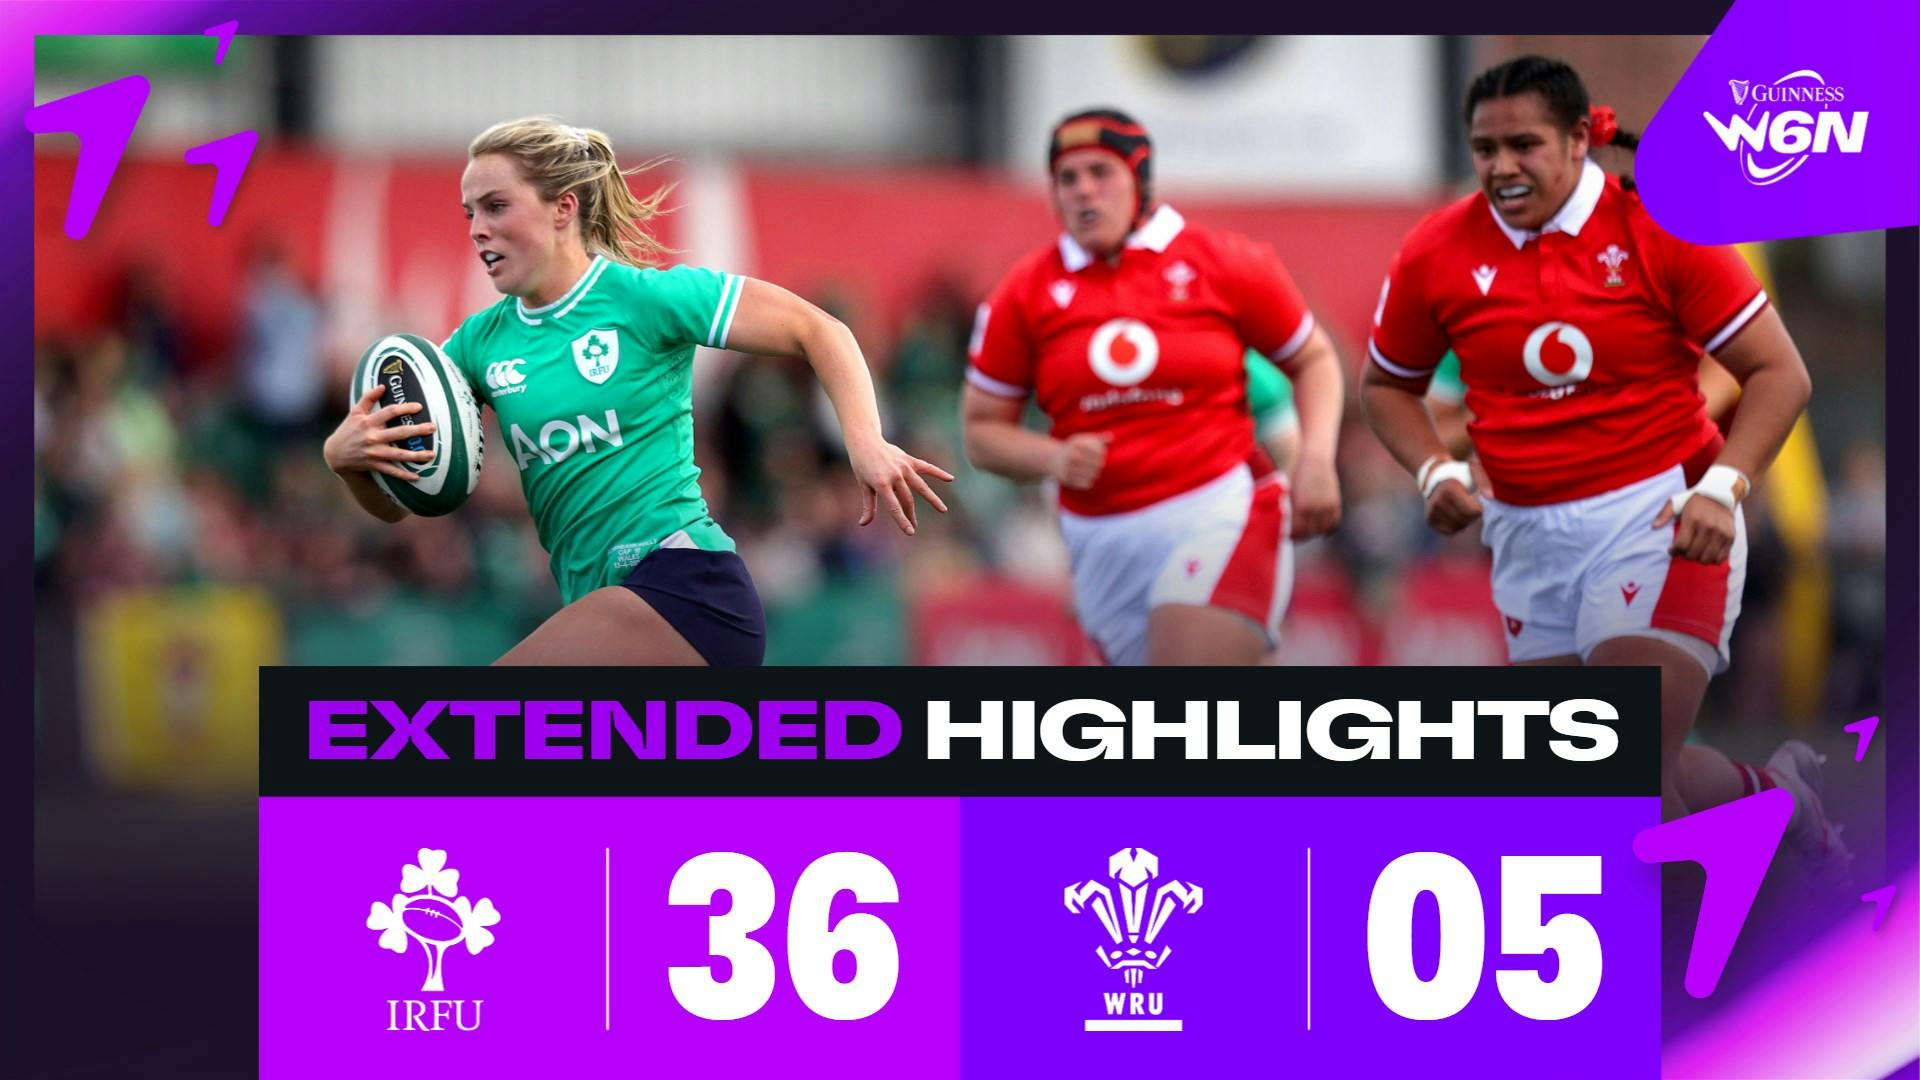 EXTENDED HIGHLIGHTS | GUINNESS WOMEN'S SIX NATIONS | IRELAND V WALES